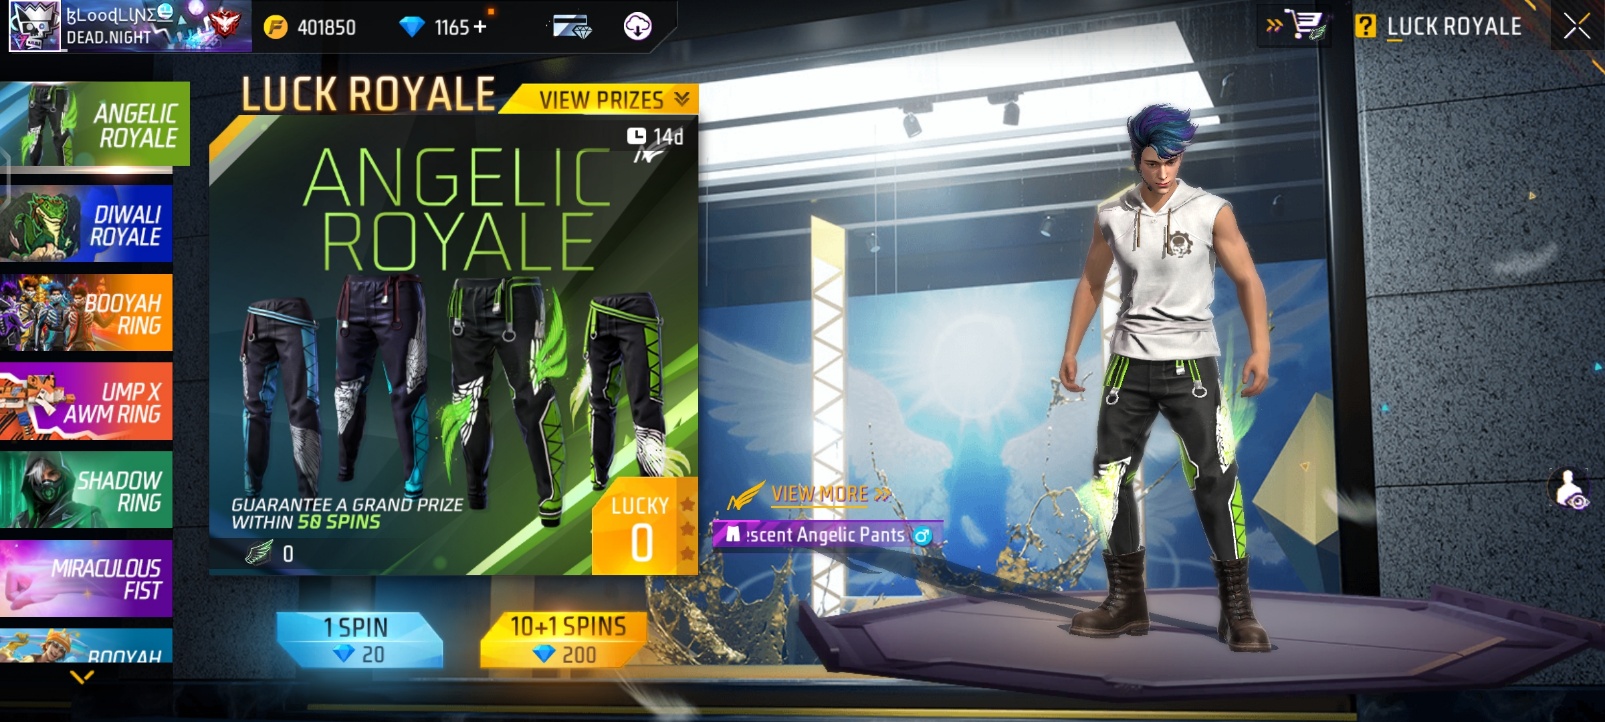 Anglic Royale Event In Free Fire Max: Here's How To Get The Angelic Pant